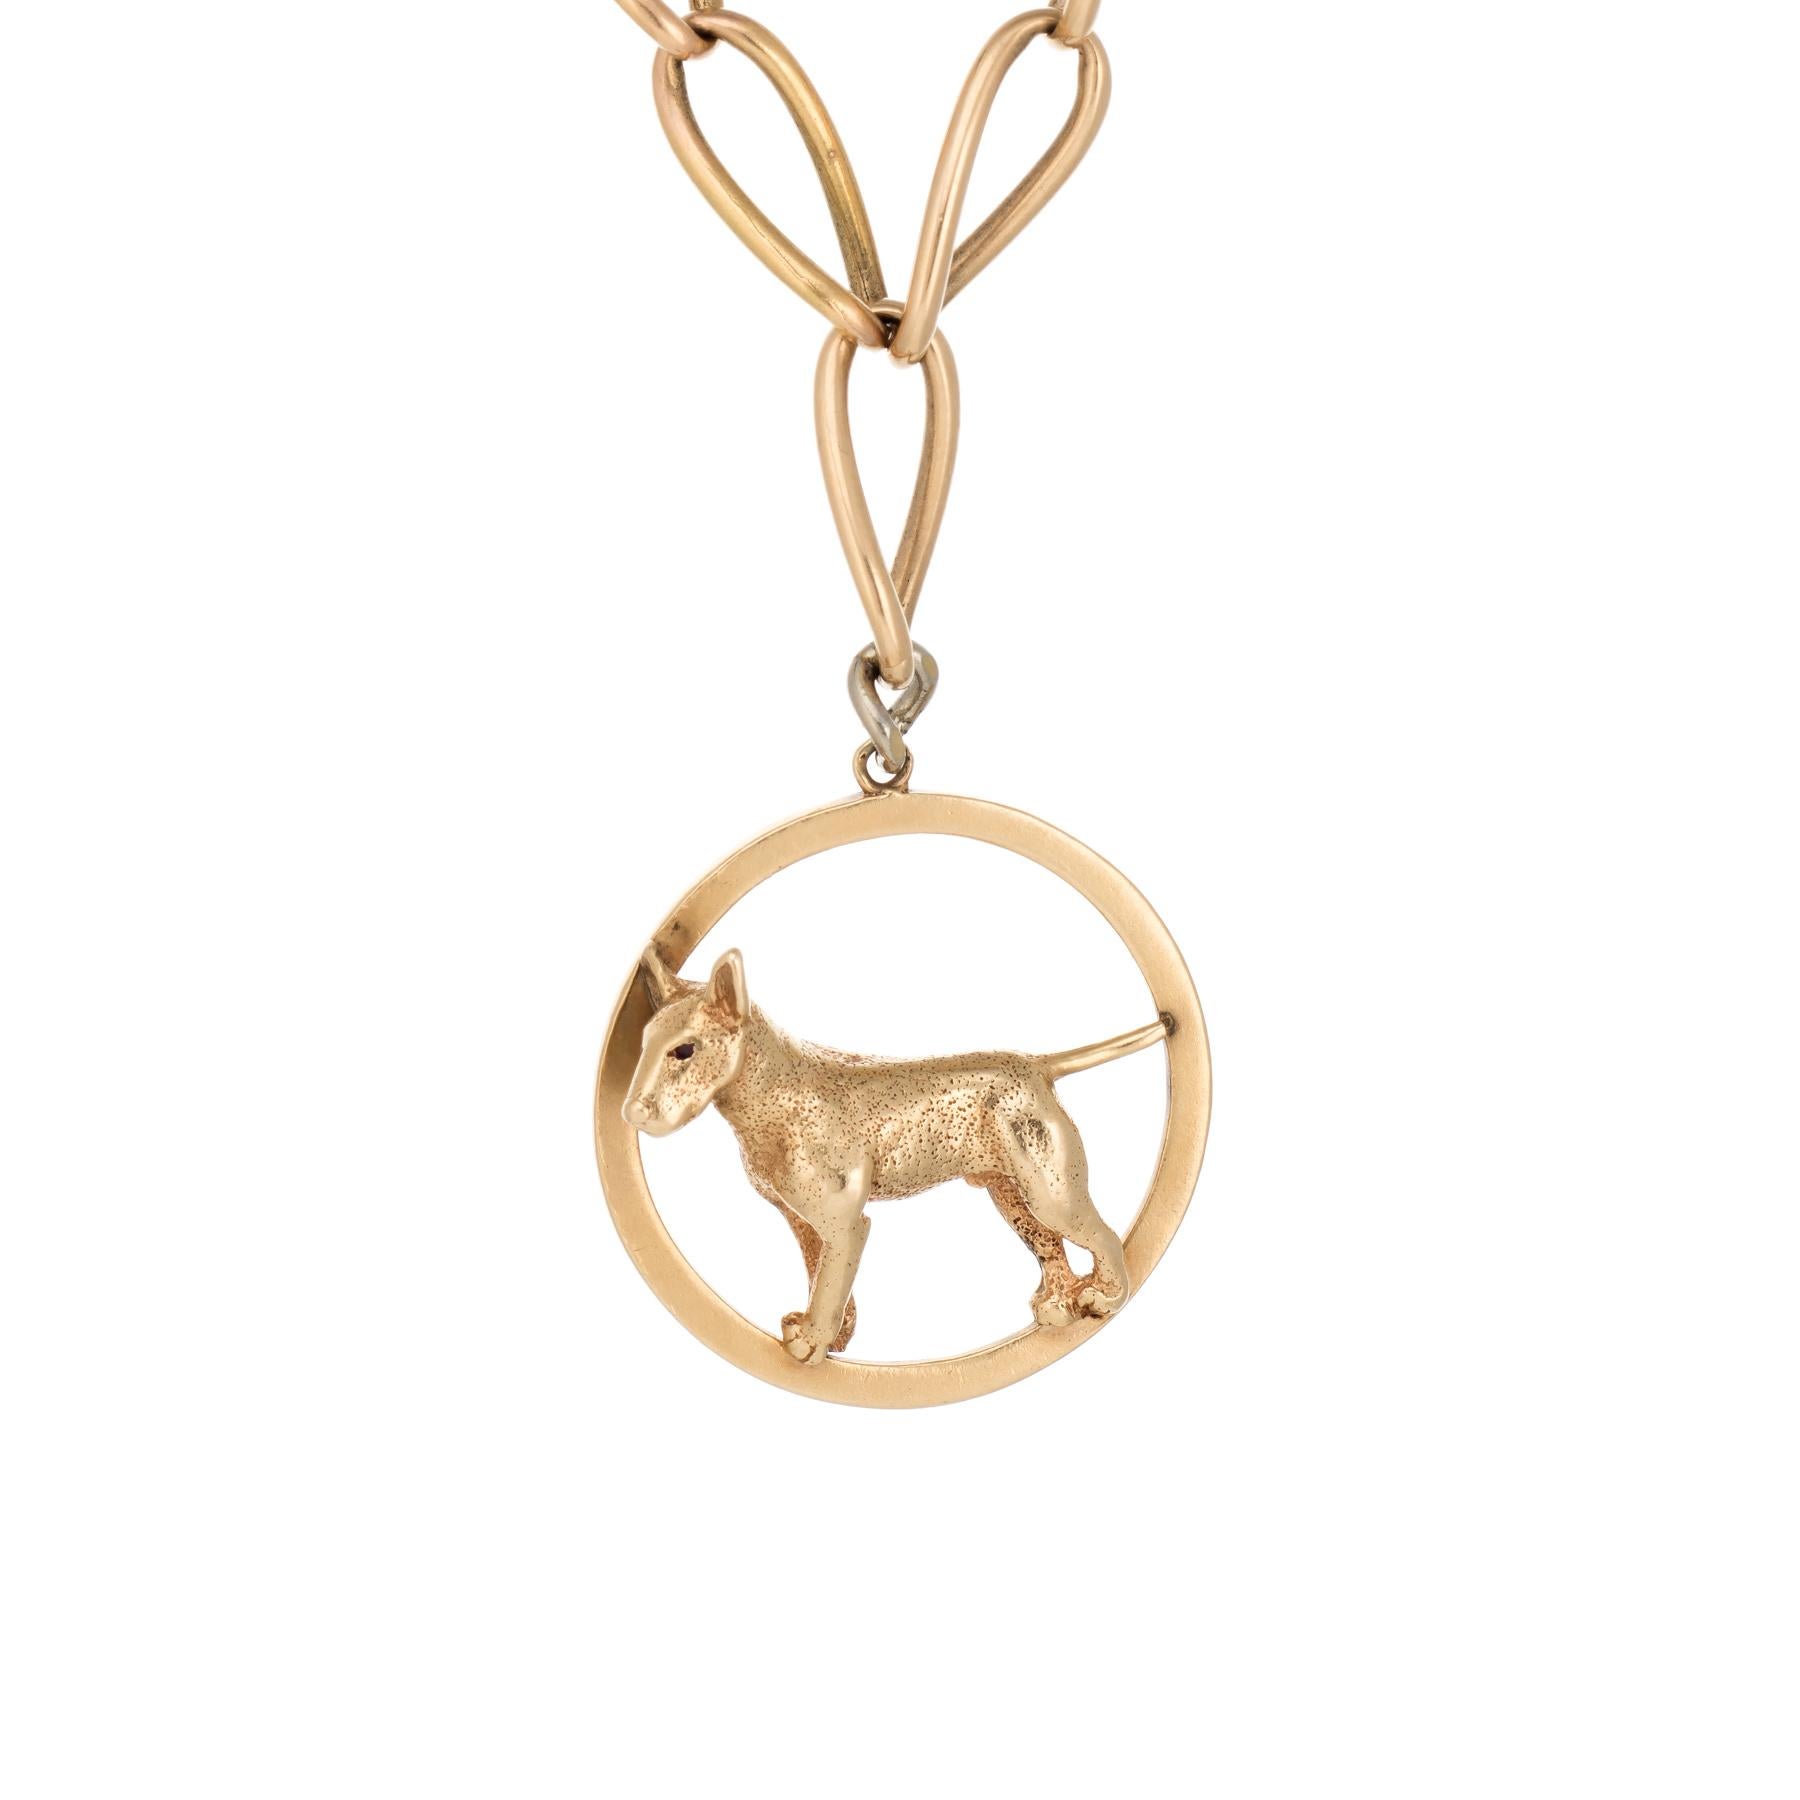 Elegant and finely detailed antique Victorian necklace, crafted in 14 karat yellow gold. Attached to the necklace is a 14 karat yellow gold dog medallion pendant by Ruser (circa 1950s). 

Two estimated 0.01 carat rubies are set into the dogs eyes